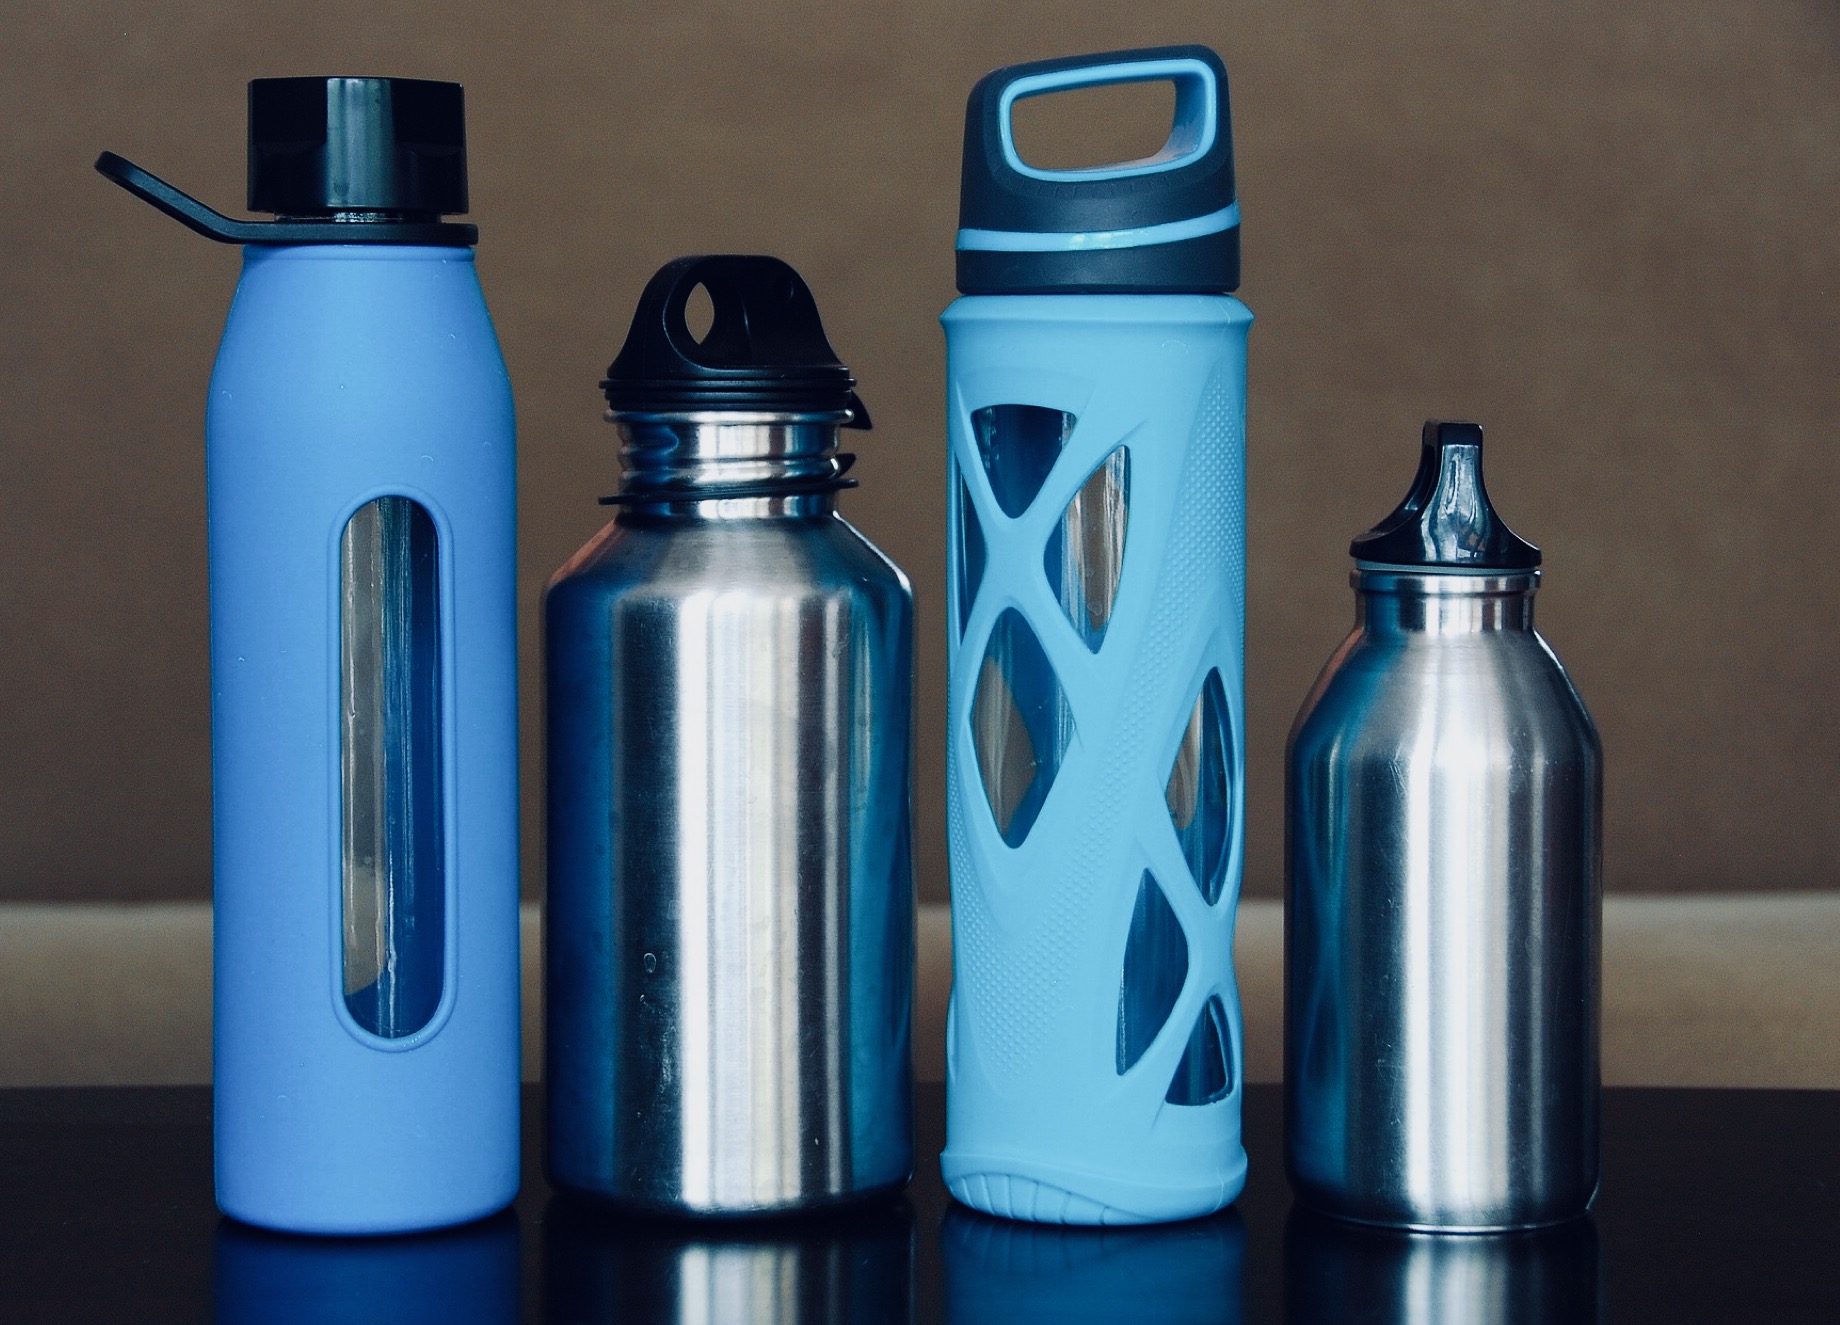 There is a reusable bottle style to suit every need!